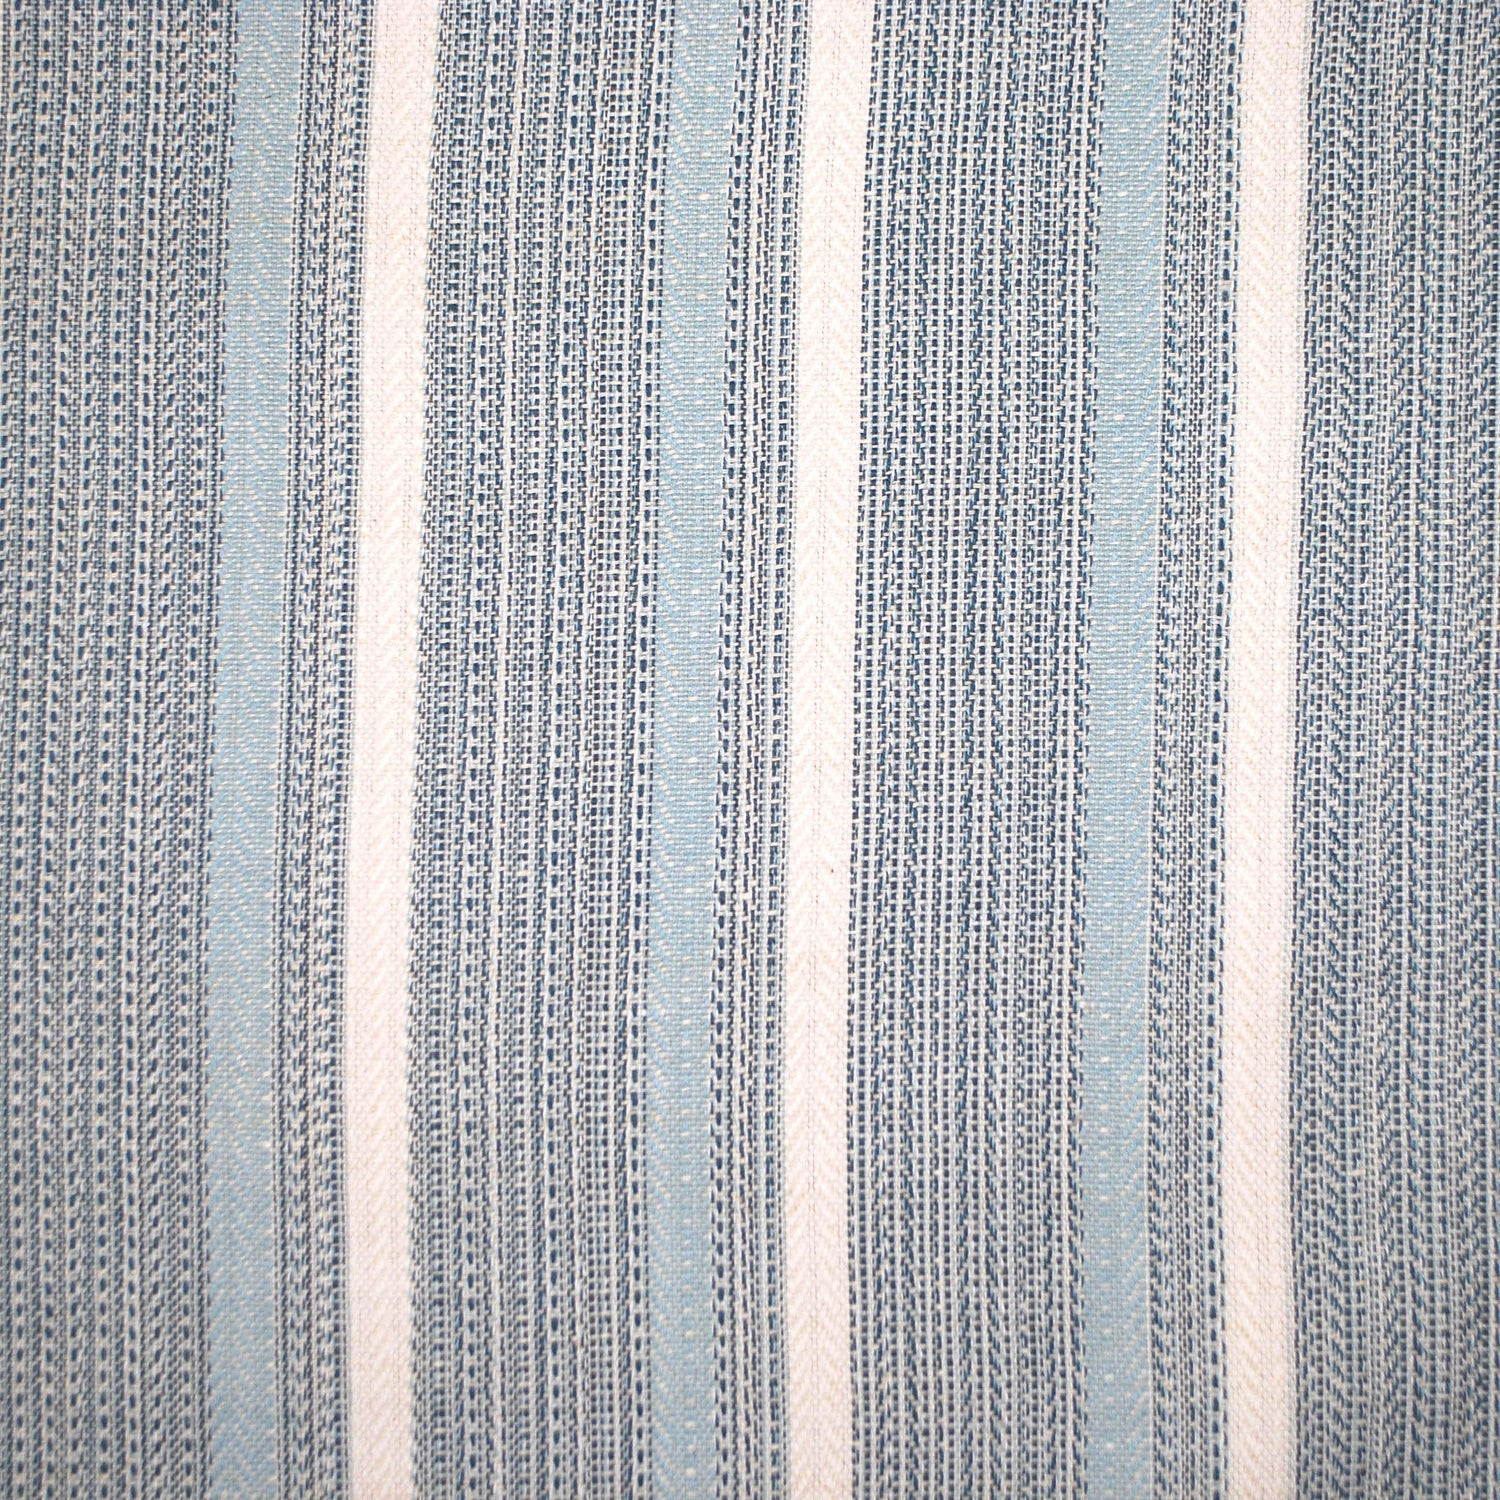 Winfield Hall fabric in bluebell color - pattern number PQ 0003A400 - by Scalamandre in the Old World Weavers collection